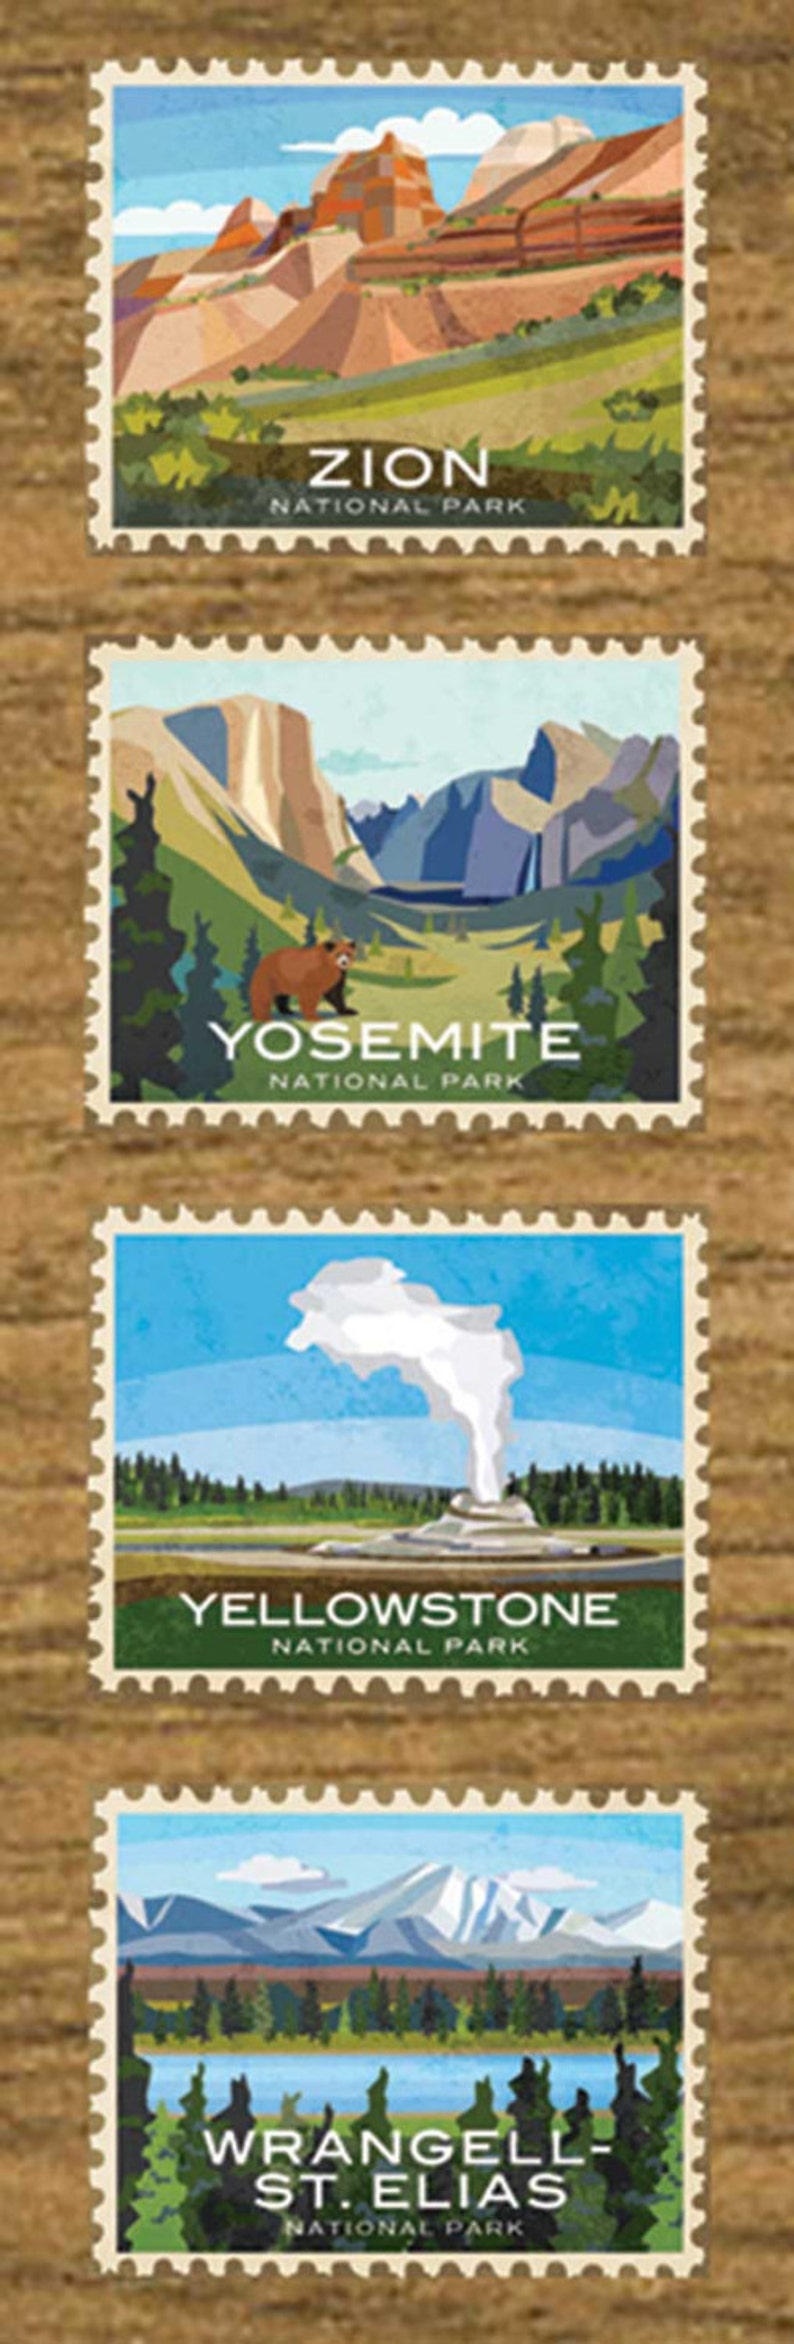 National Parks Travel Quest Poster image 10